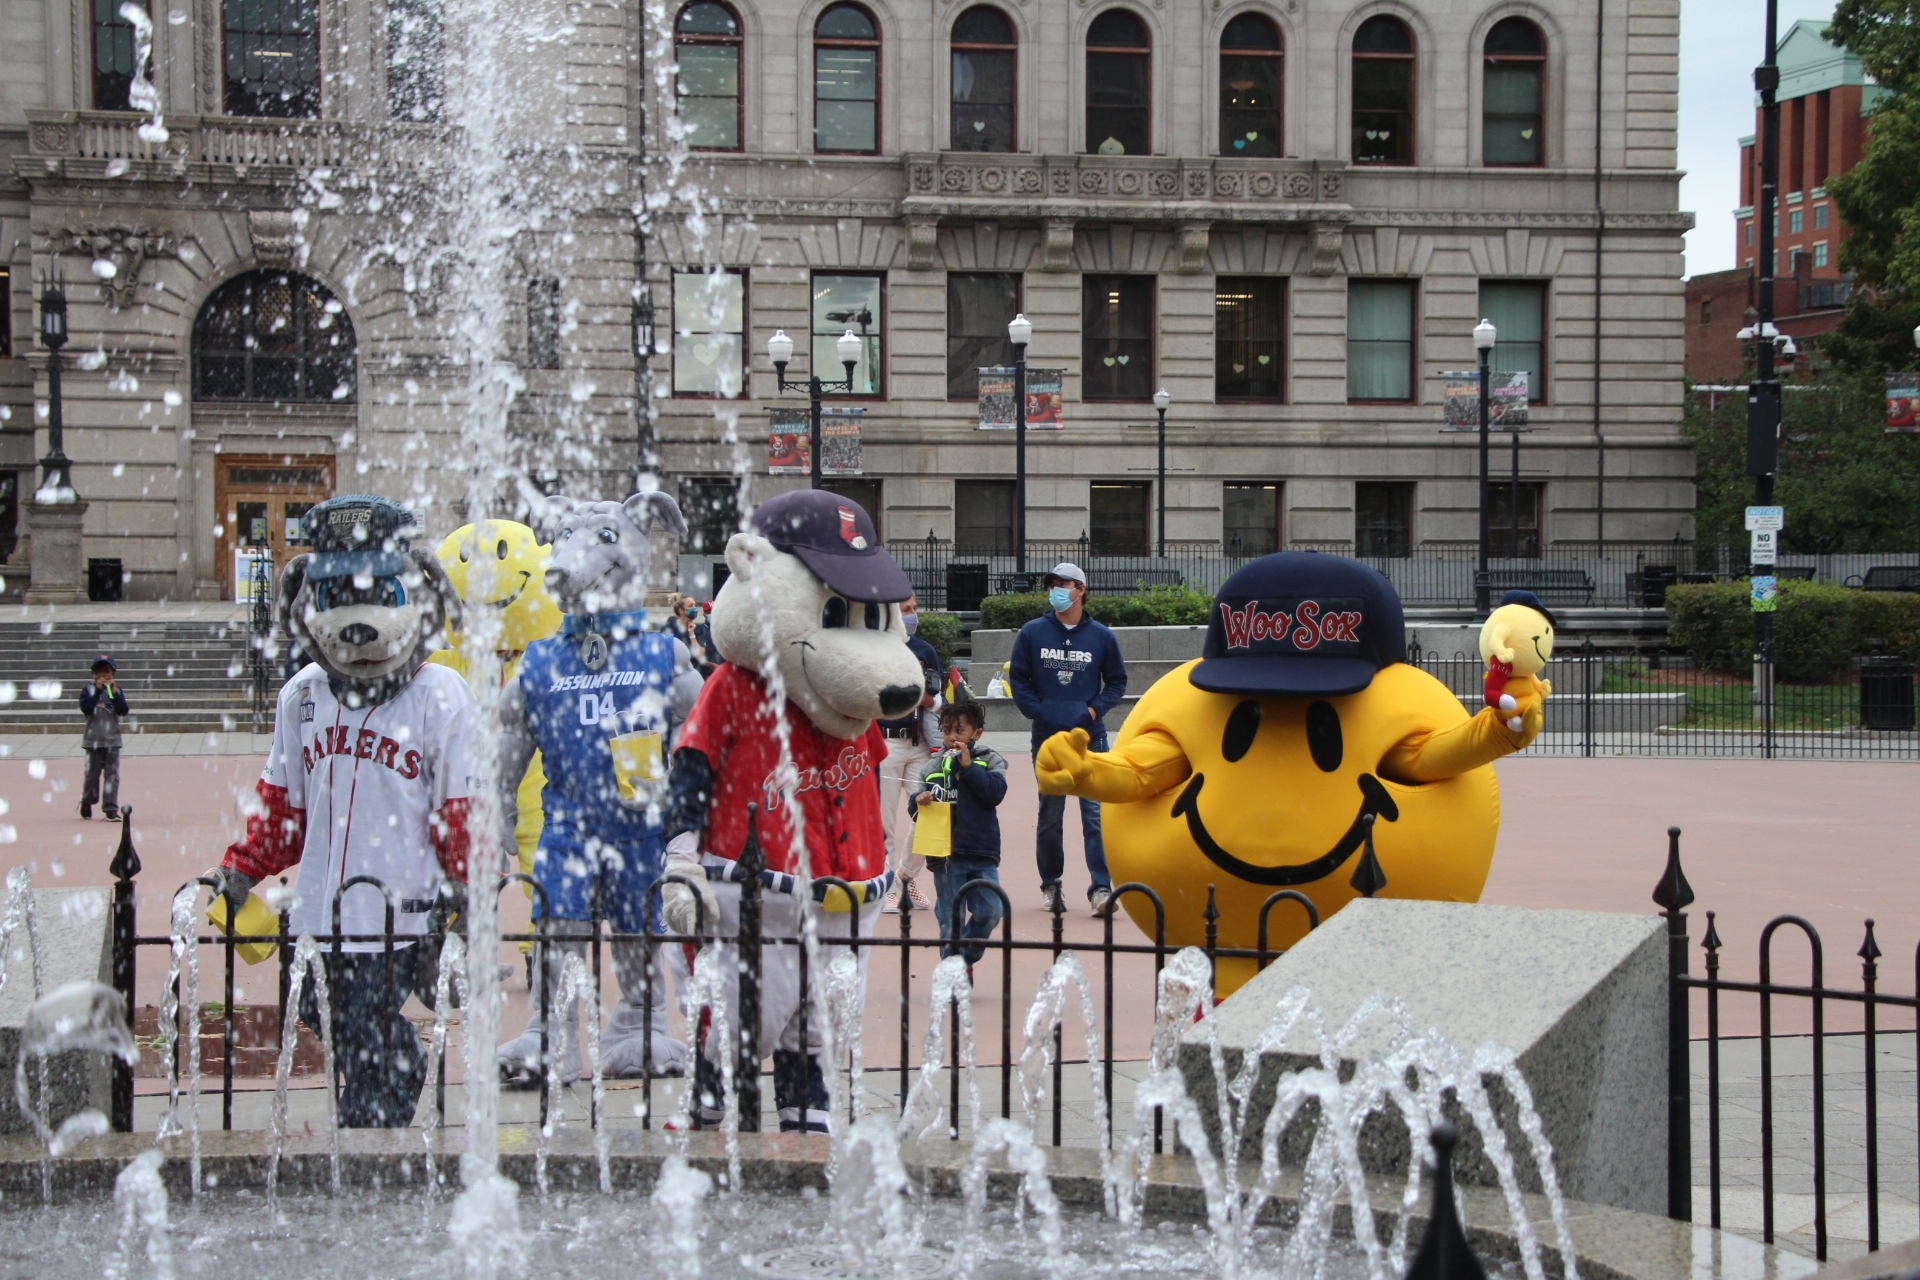 Smiley Ball debuts as WooSox mascot on World Smile Day 